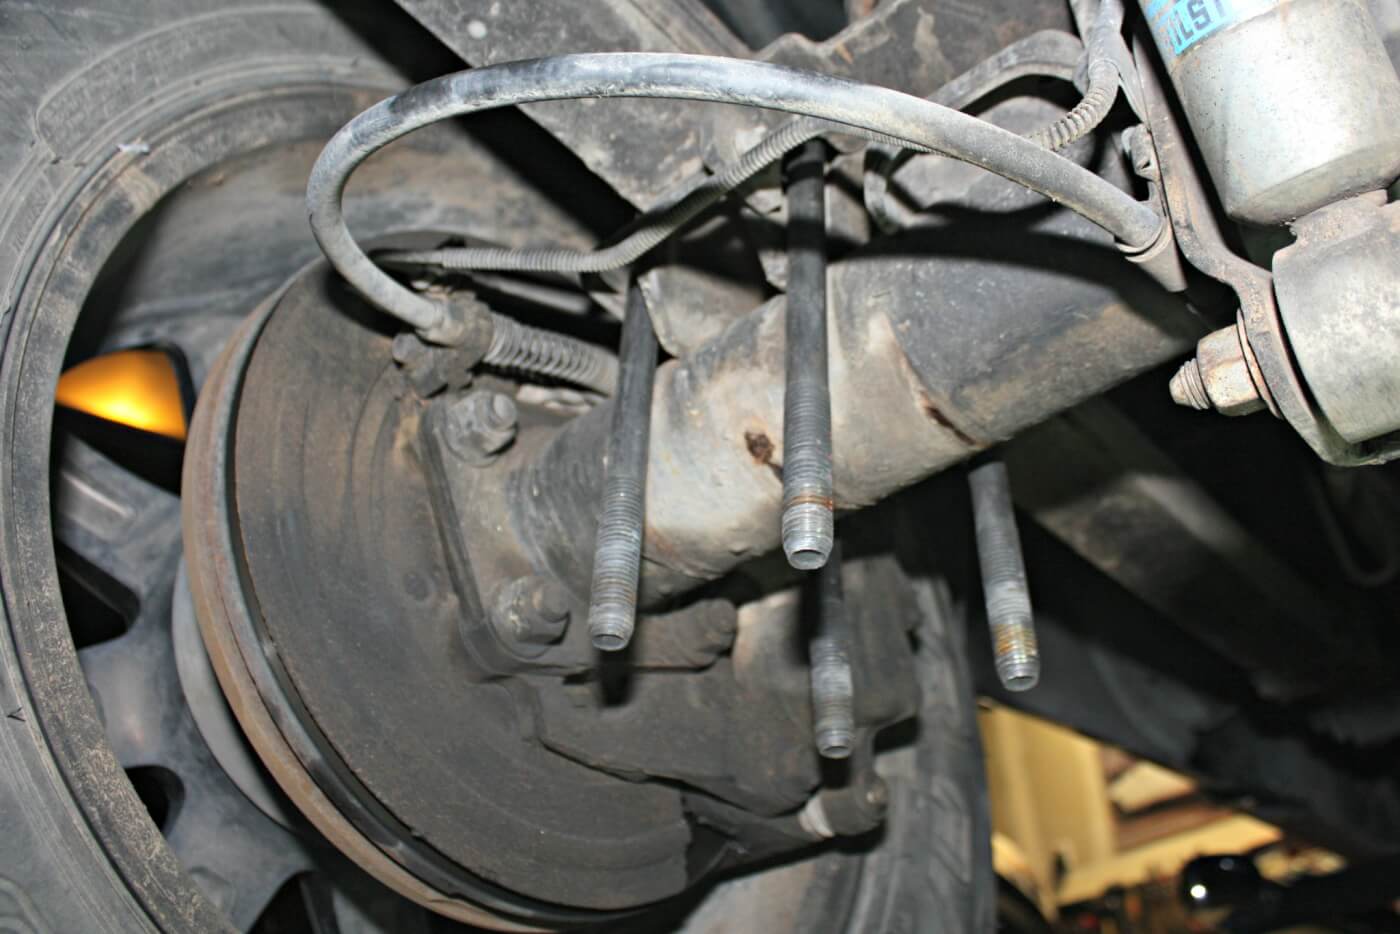 3. The first step to the install is removing the factory axle U-bolt nuts and washers. The Longhorn axle bracket will bolt-up using the factory U-bolts and hardware; you’ll simply slide the new bracket onto the U-bolts below the lower axle clamp plate.